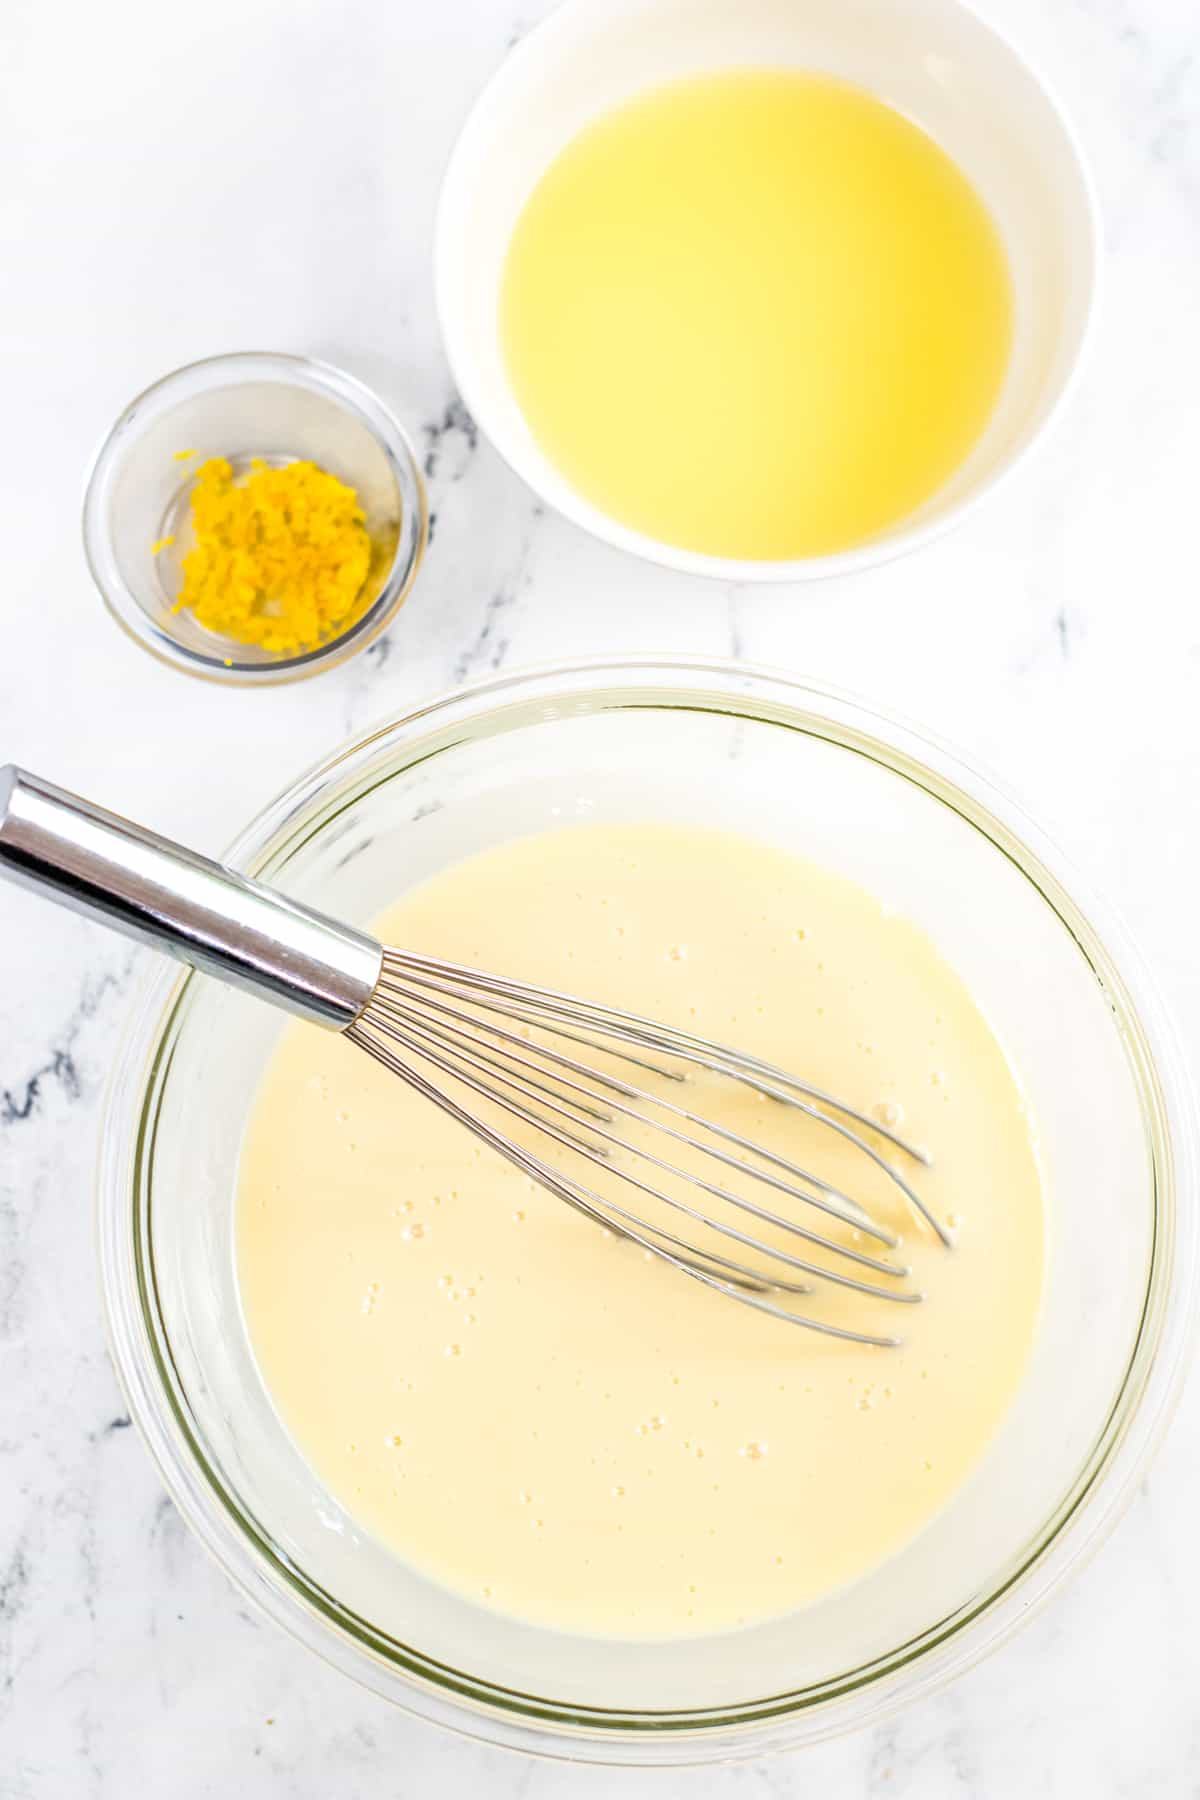 Whisk in bowl of sweetened condensed milk. Lemon zest and lemon juice in bowls next to large mixing bowl.